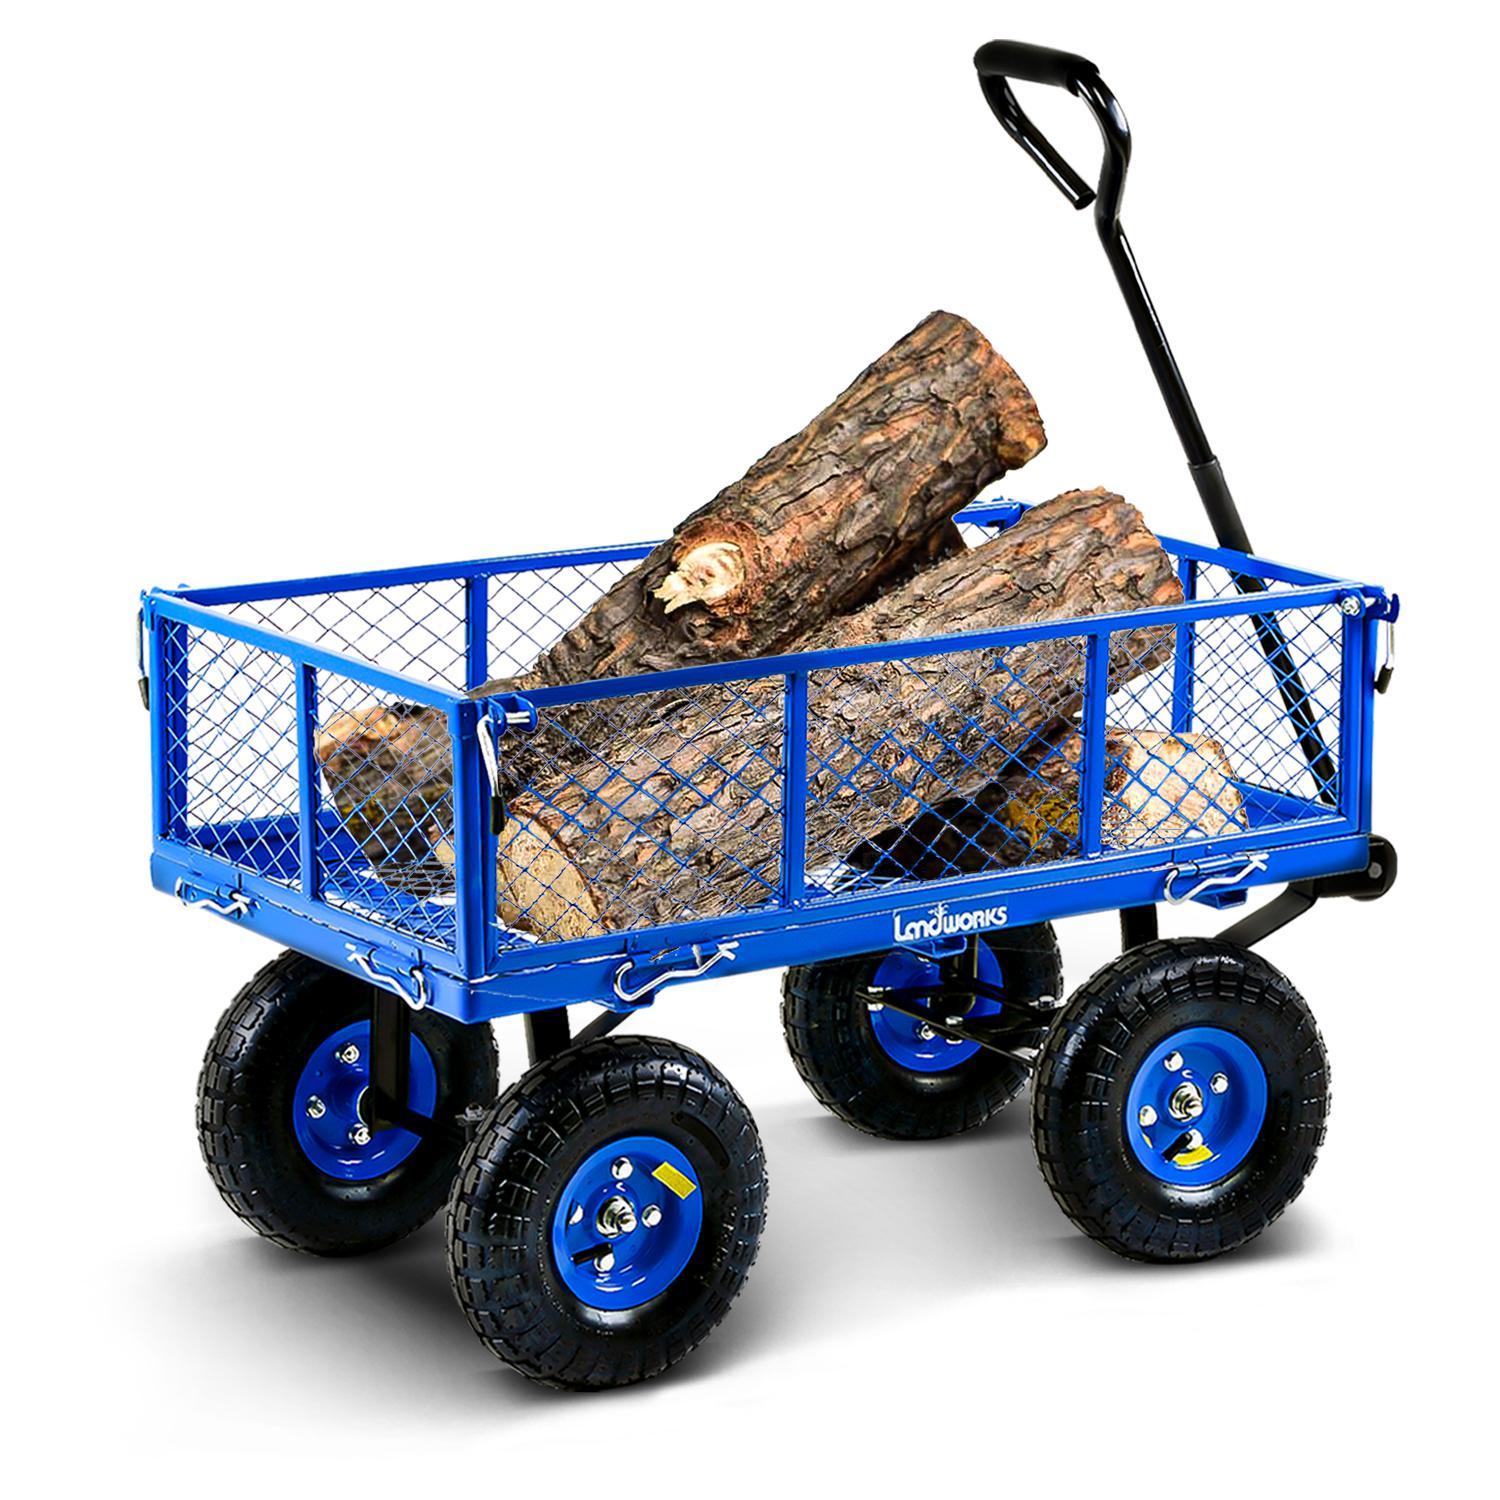 Landworks Heavy Duty Utility Wagon 400LB Capacity - For Hauling Wood, Tools, & Materials (Blue) - DIY Tools by GreatCircleUS